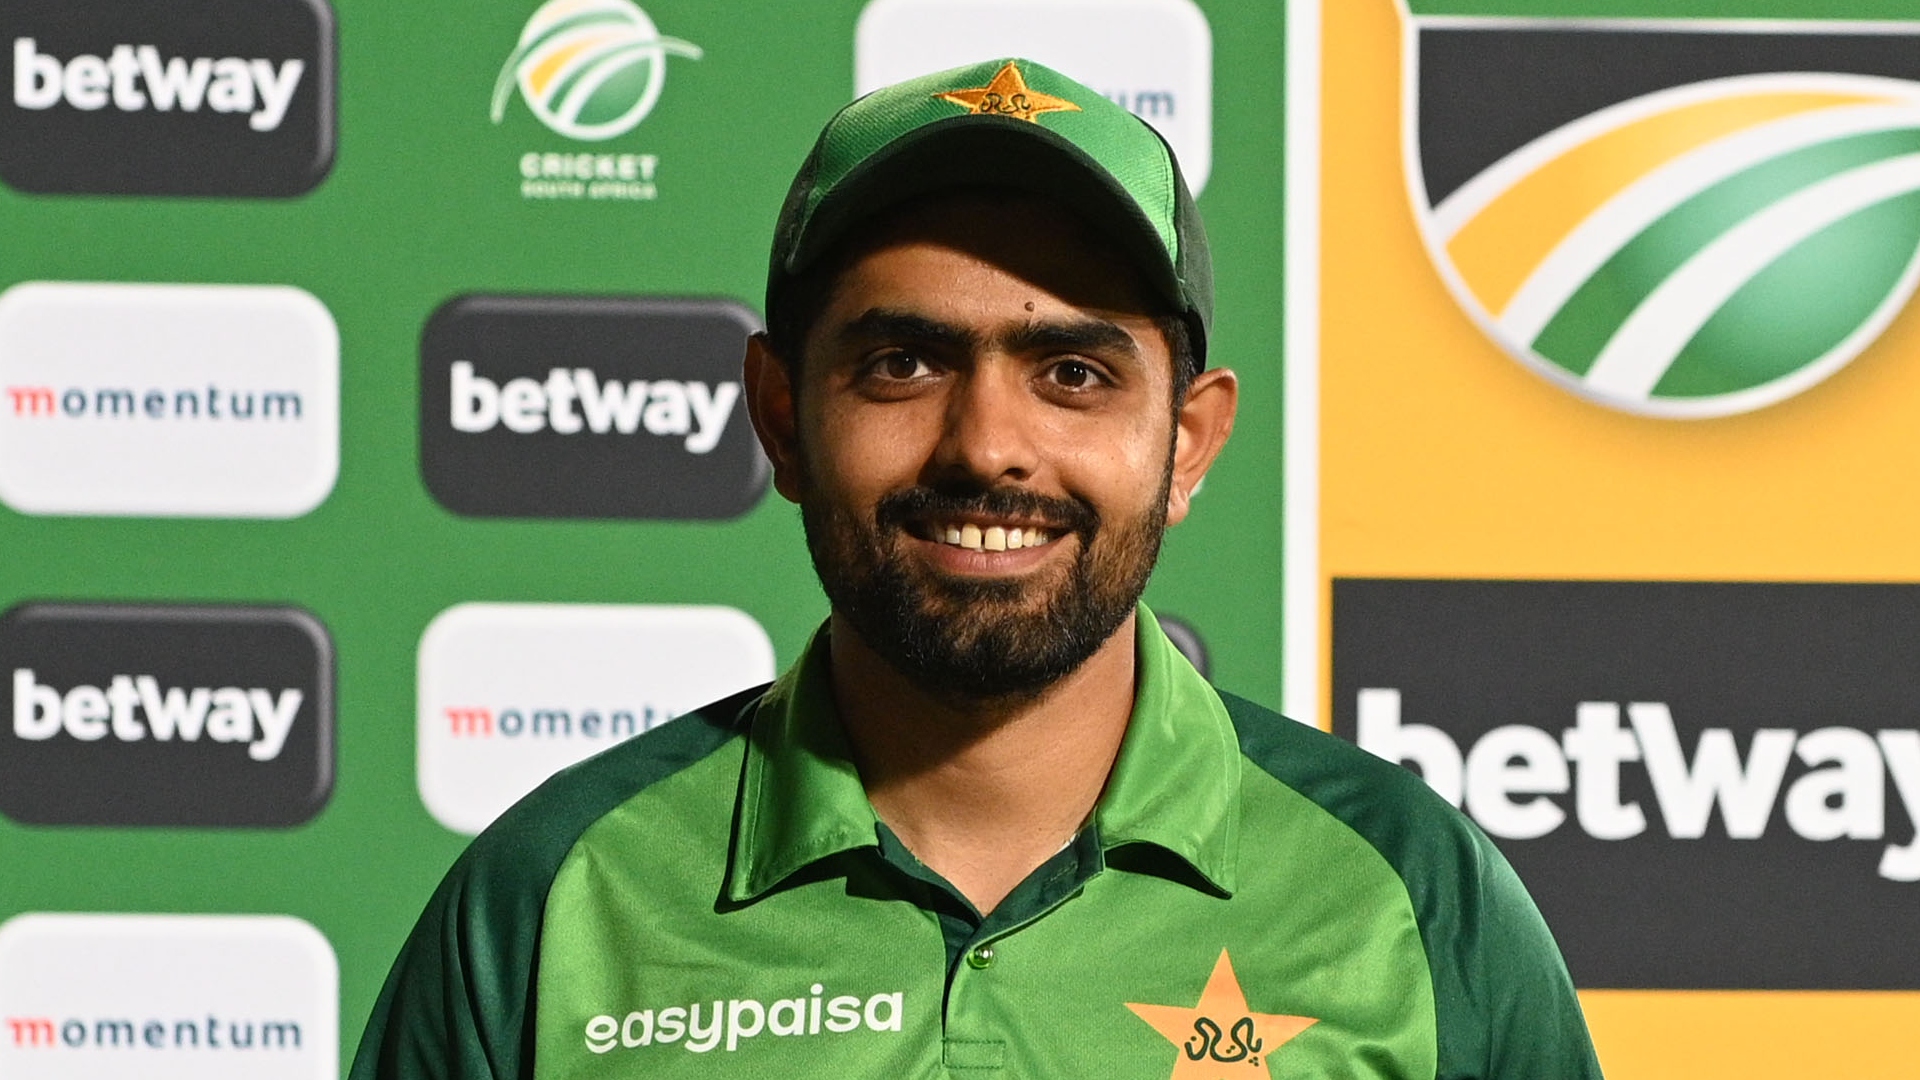 After his eye-catching exploits for Pakistan in the ODI series win over South Africa, Babar Azam earned recognition in the batting rankings.